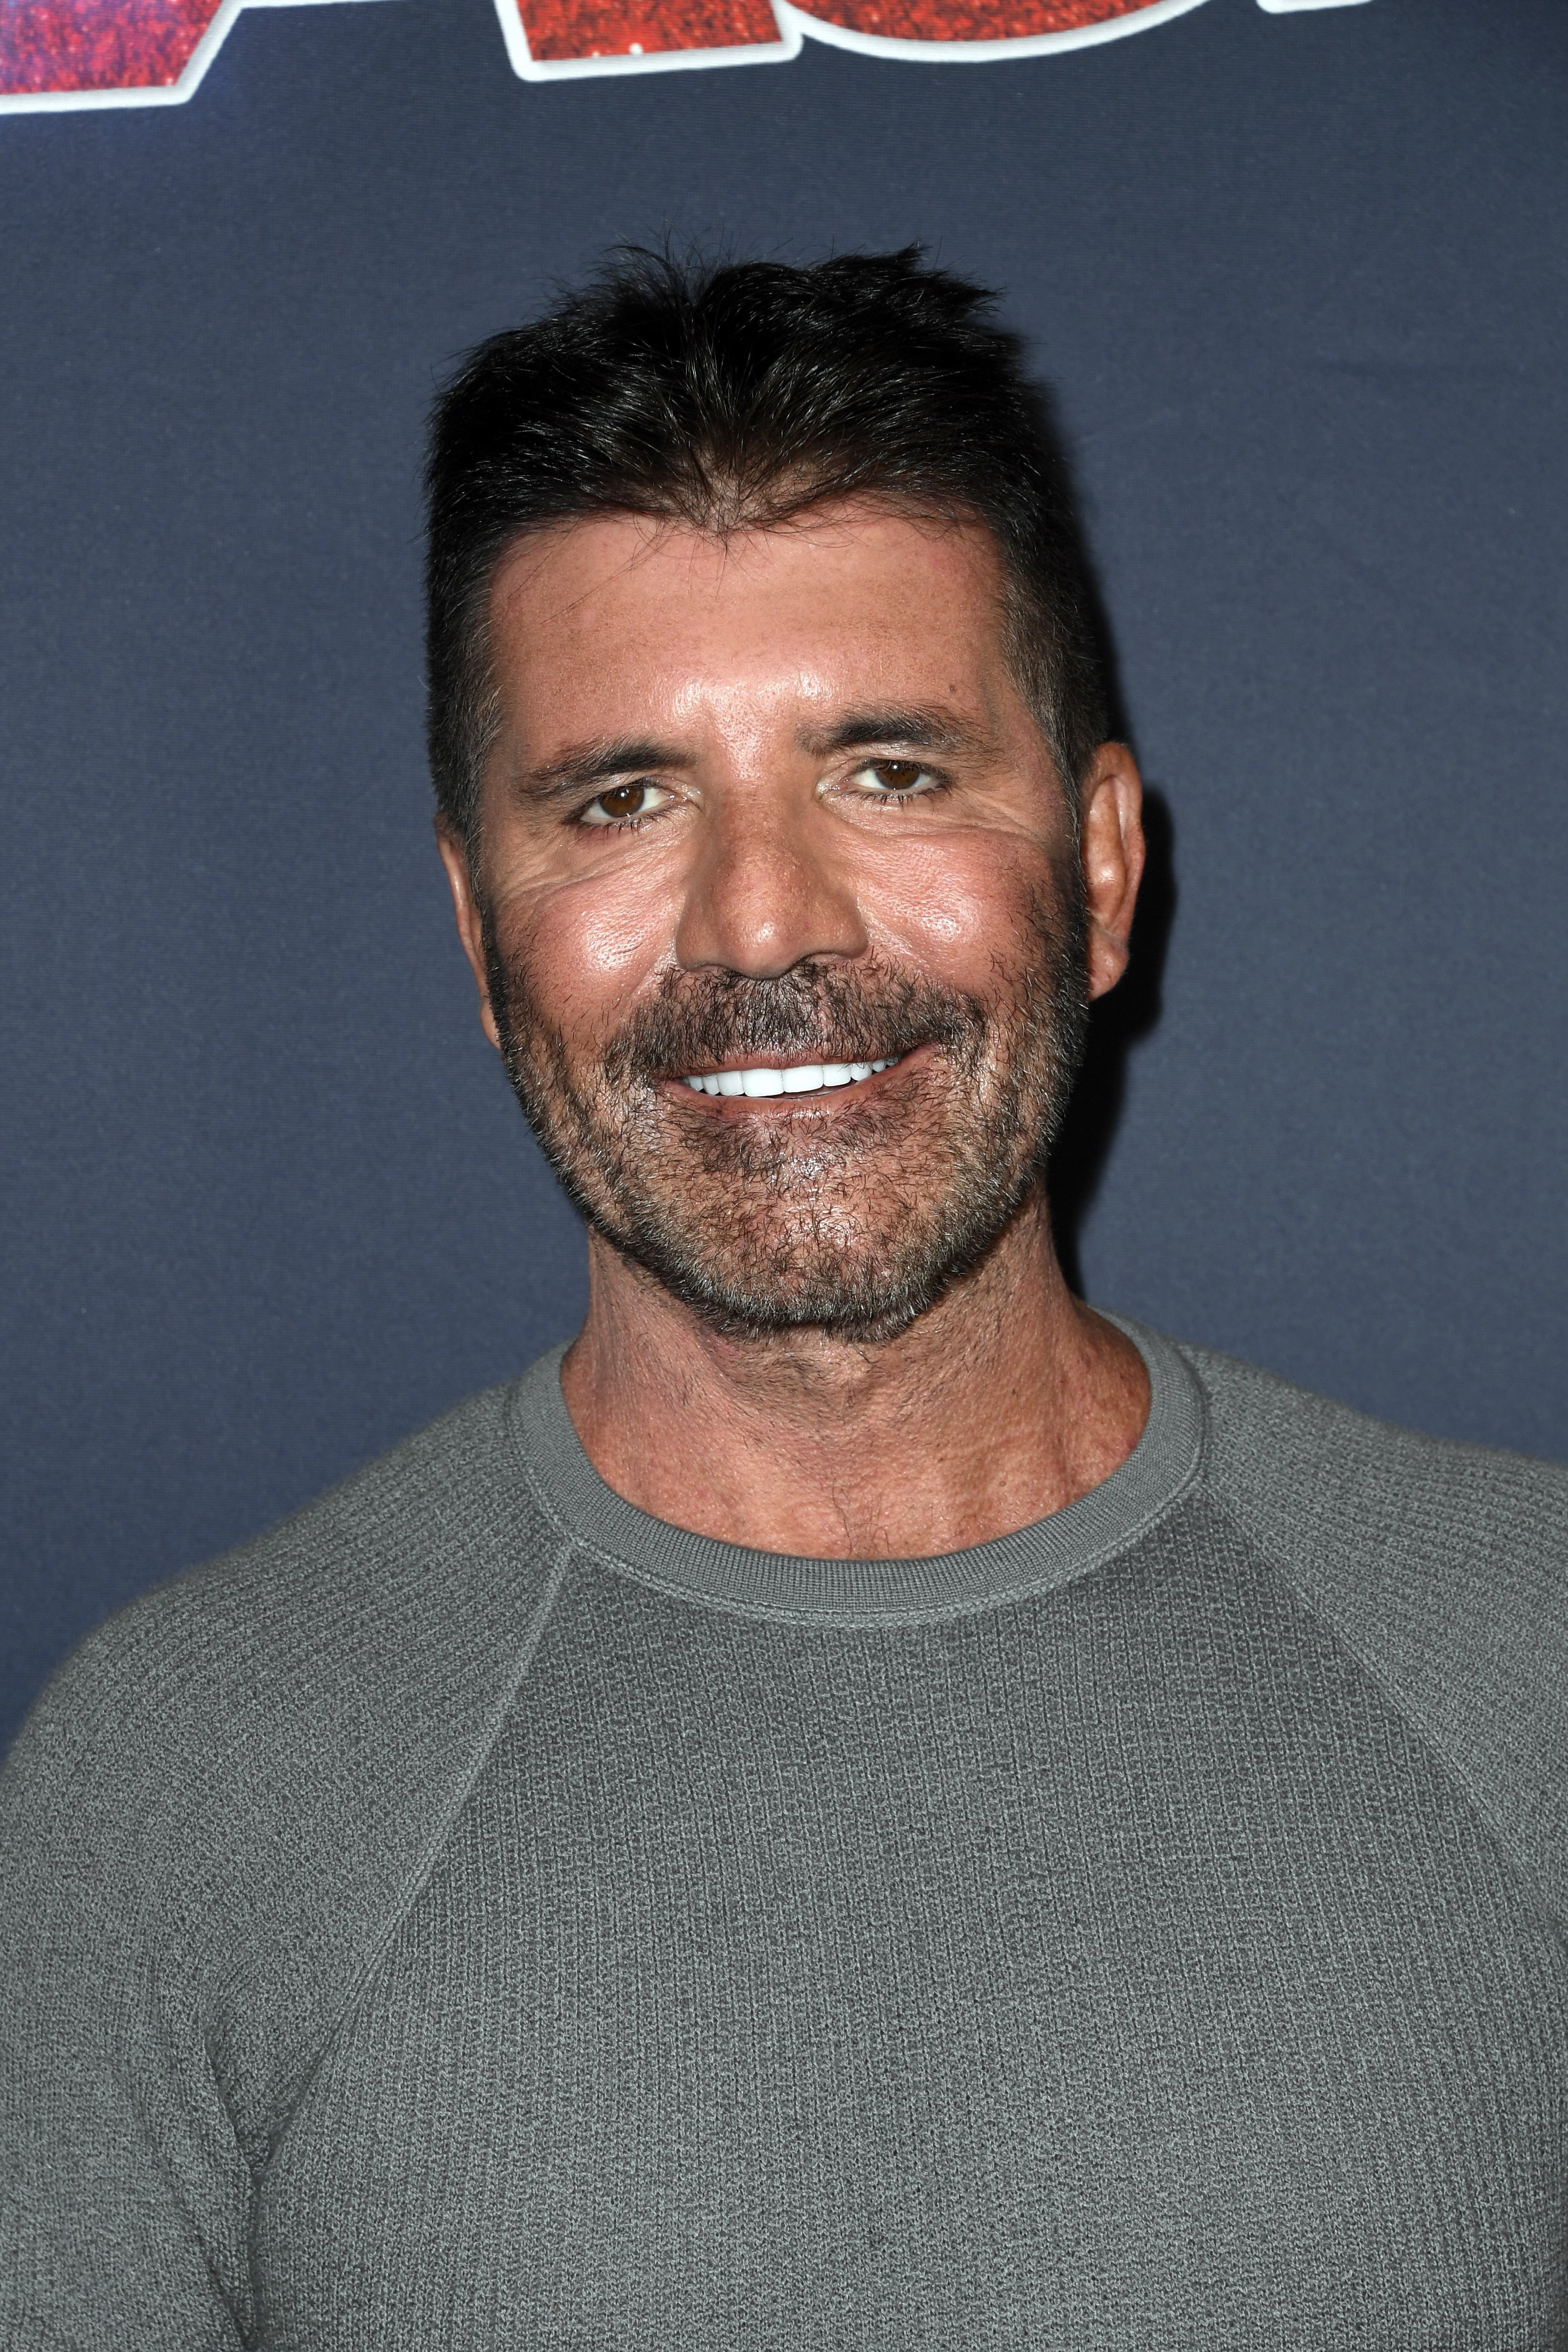 Simon Cowell attends "America's Got Talent" season 14 Live Show in Hollywood, California on August 13, 2019 | Photo: Getty Images